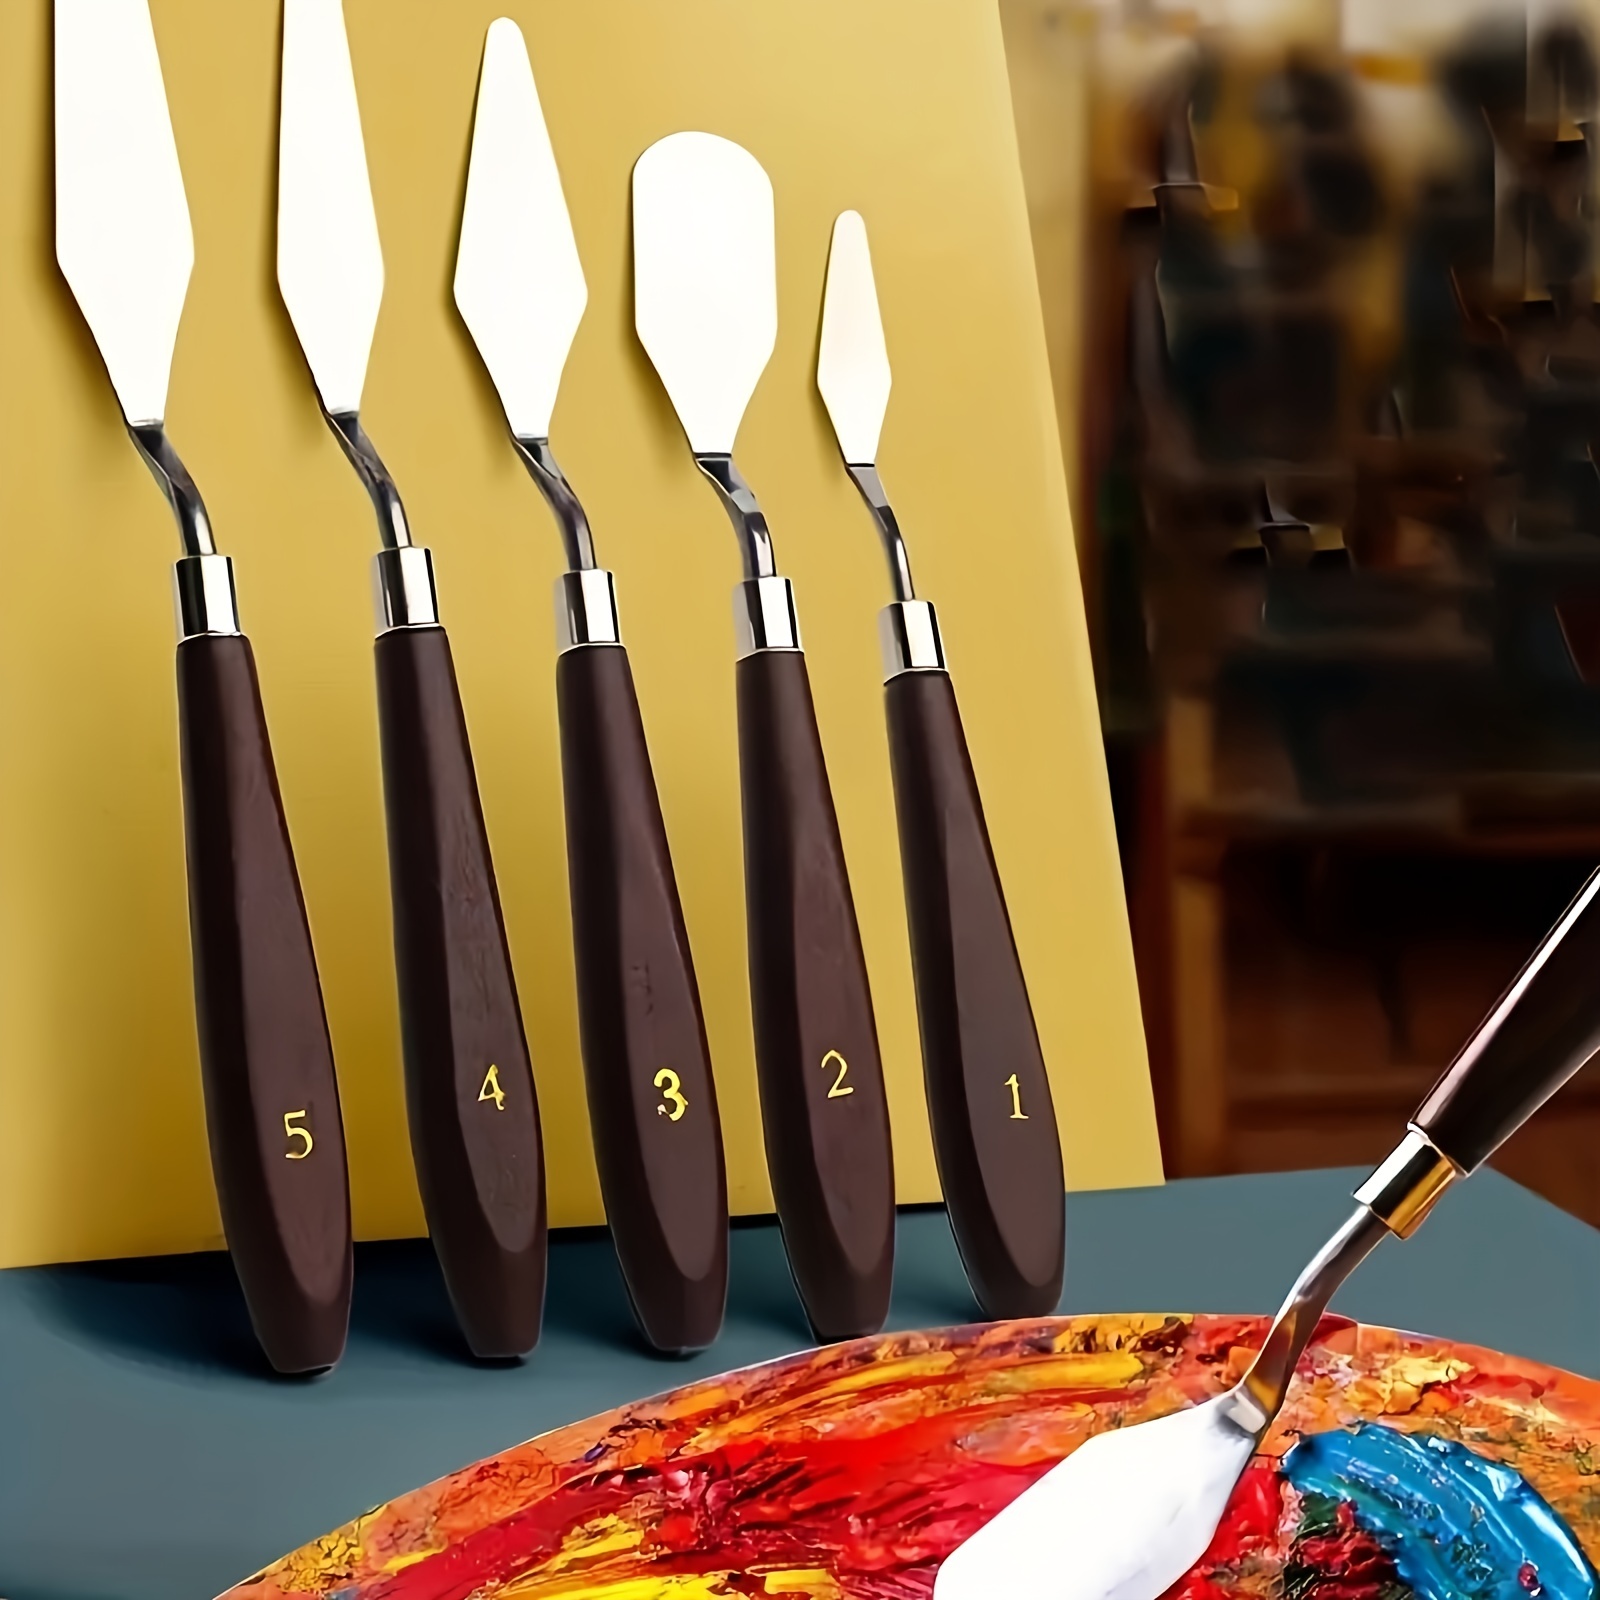 U.S. Art Supply 18-Piece Artist Stainless Steel Palette Knife Set - Wood  Hande Flexible Spatula Painting Knives for Color Mixing Spreading, Applying  Oil, Acrylic, Pouring Paint on Canvases, Cake Icing